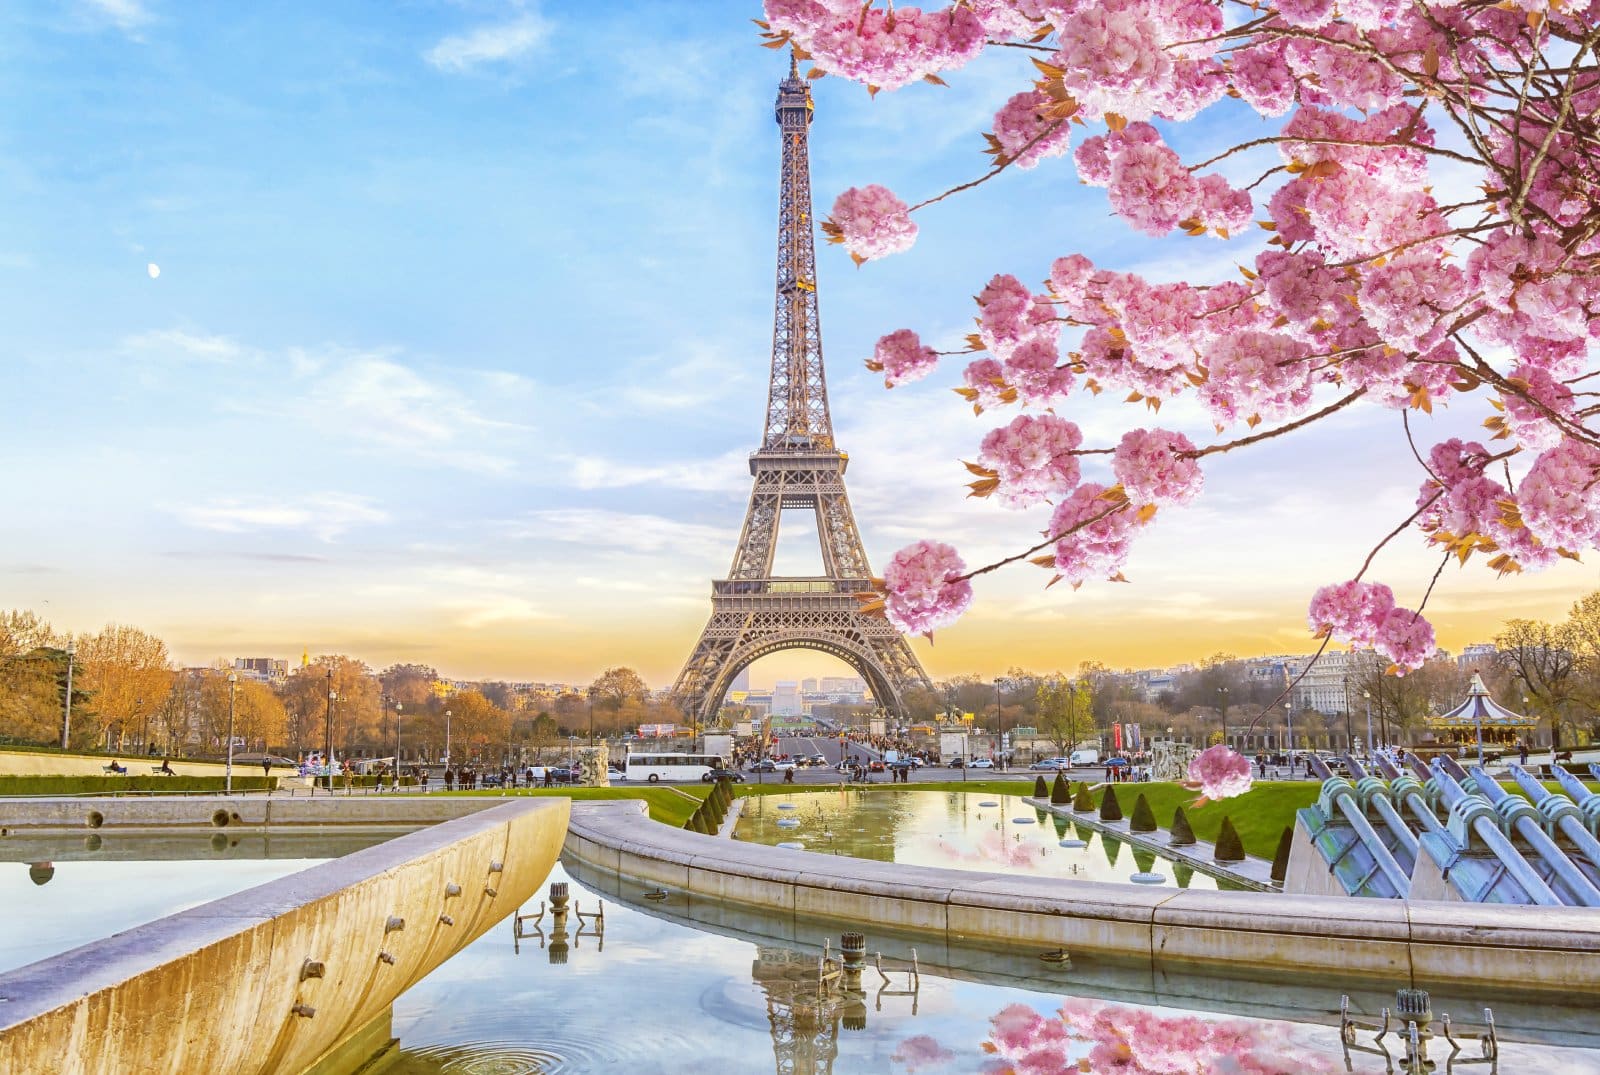 <p class="wp-caption-text">Image Credit: Shutterstock / Marina Datsenko</p>  <p>France reigns supreme with its world-renowned cuisine, iconic landmarks, and romantic allure. The beauty of Paris, the charm of its countryside, and the splendor of its coastlines keep travelers coming back for more.</p>